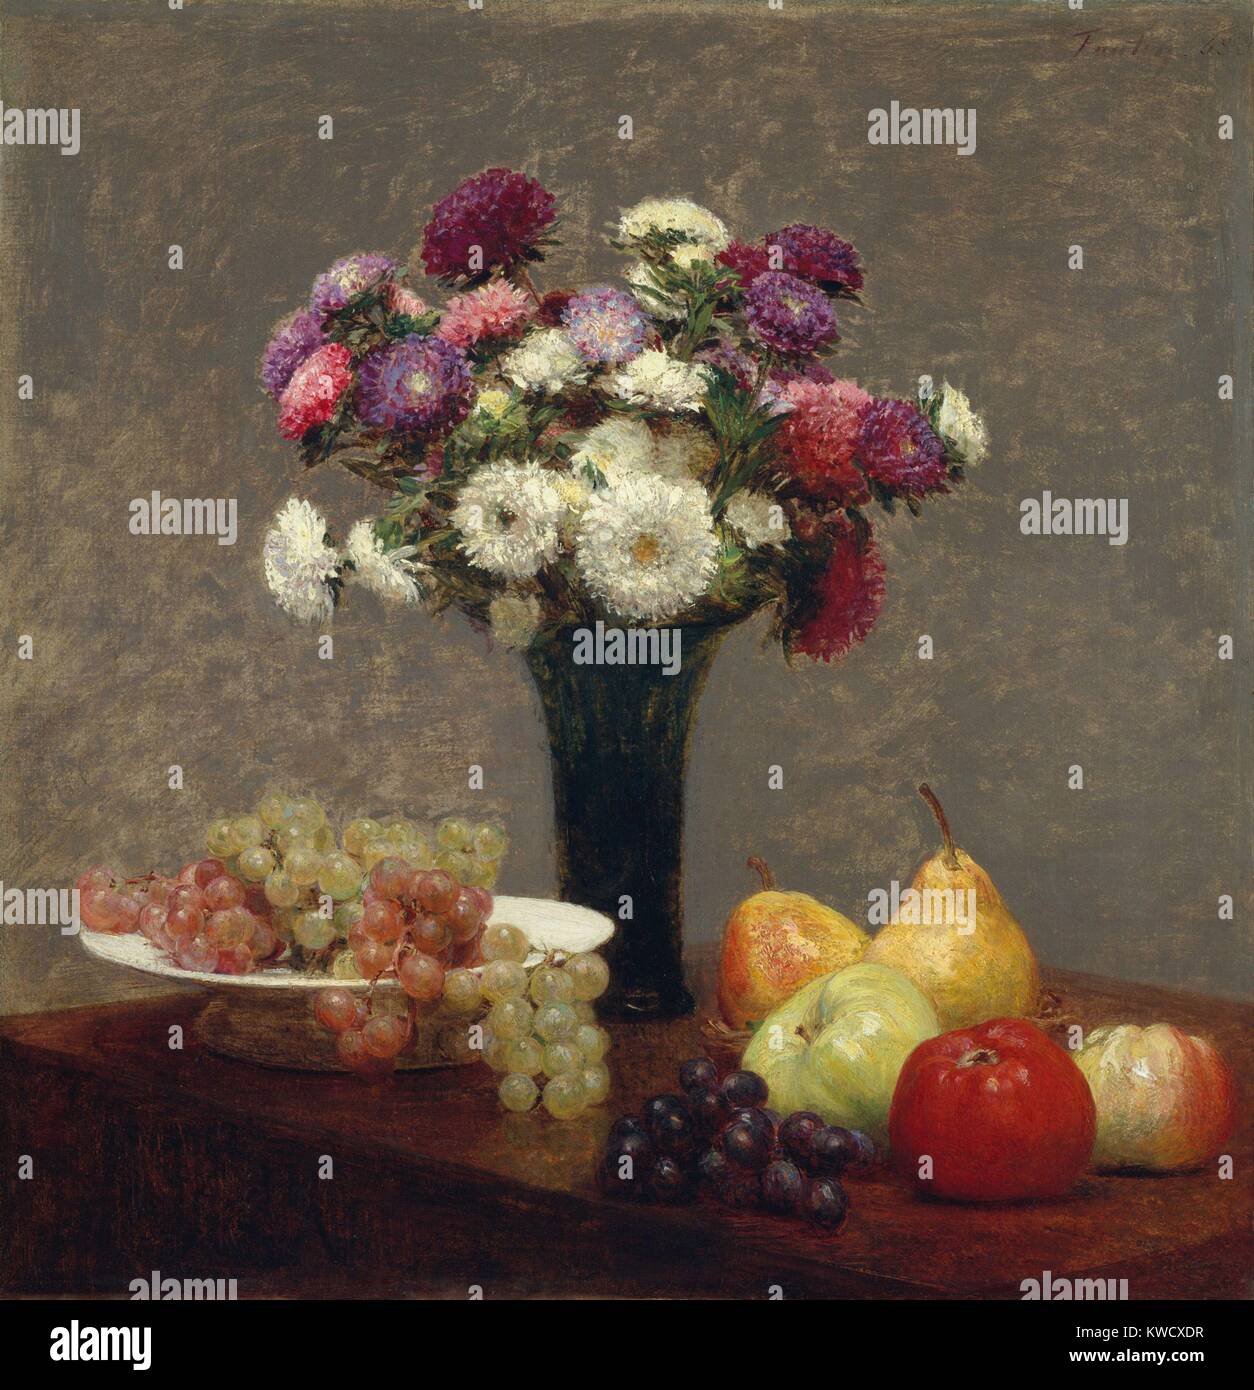 Asters and Fruit on a Table, by Henri Fantin-Latour, 1868, French impressionist oil painting. Fantin-Latour used simple vases and plain tabletops that emphasized his virtuoso painting of flowers and fruits (BSLOC 2017 3 149) Stock Photo